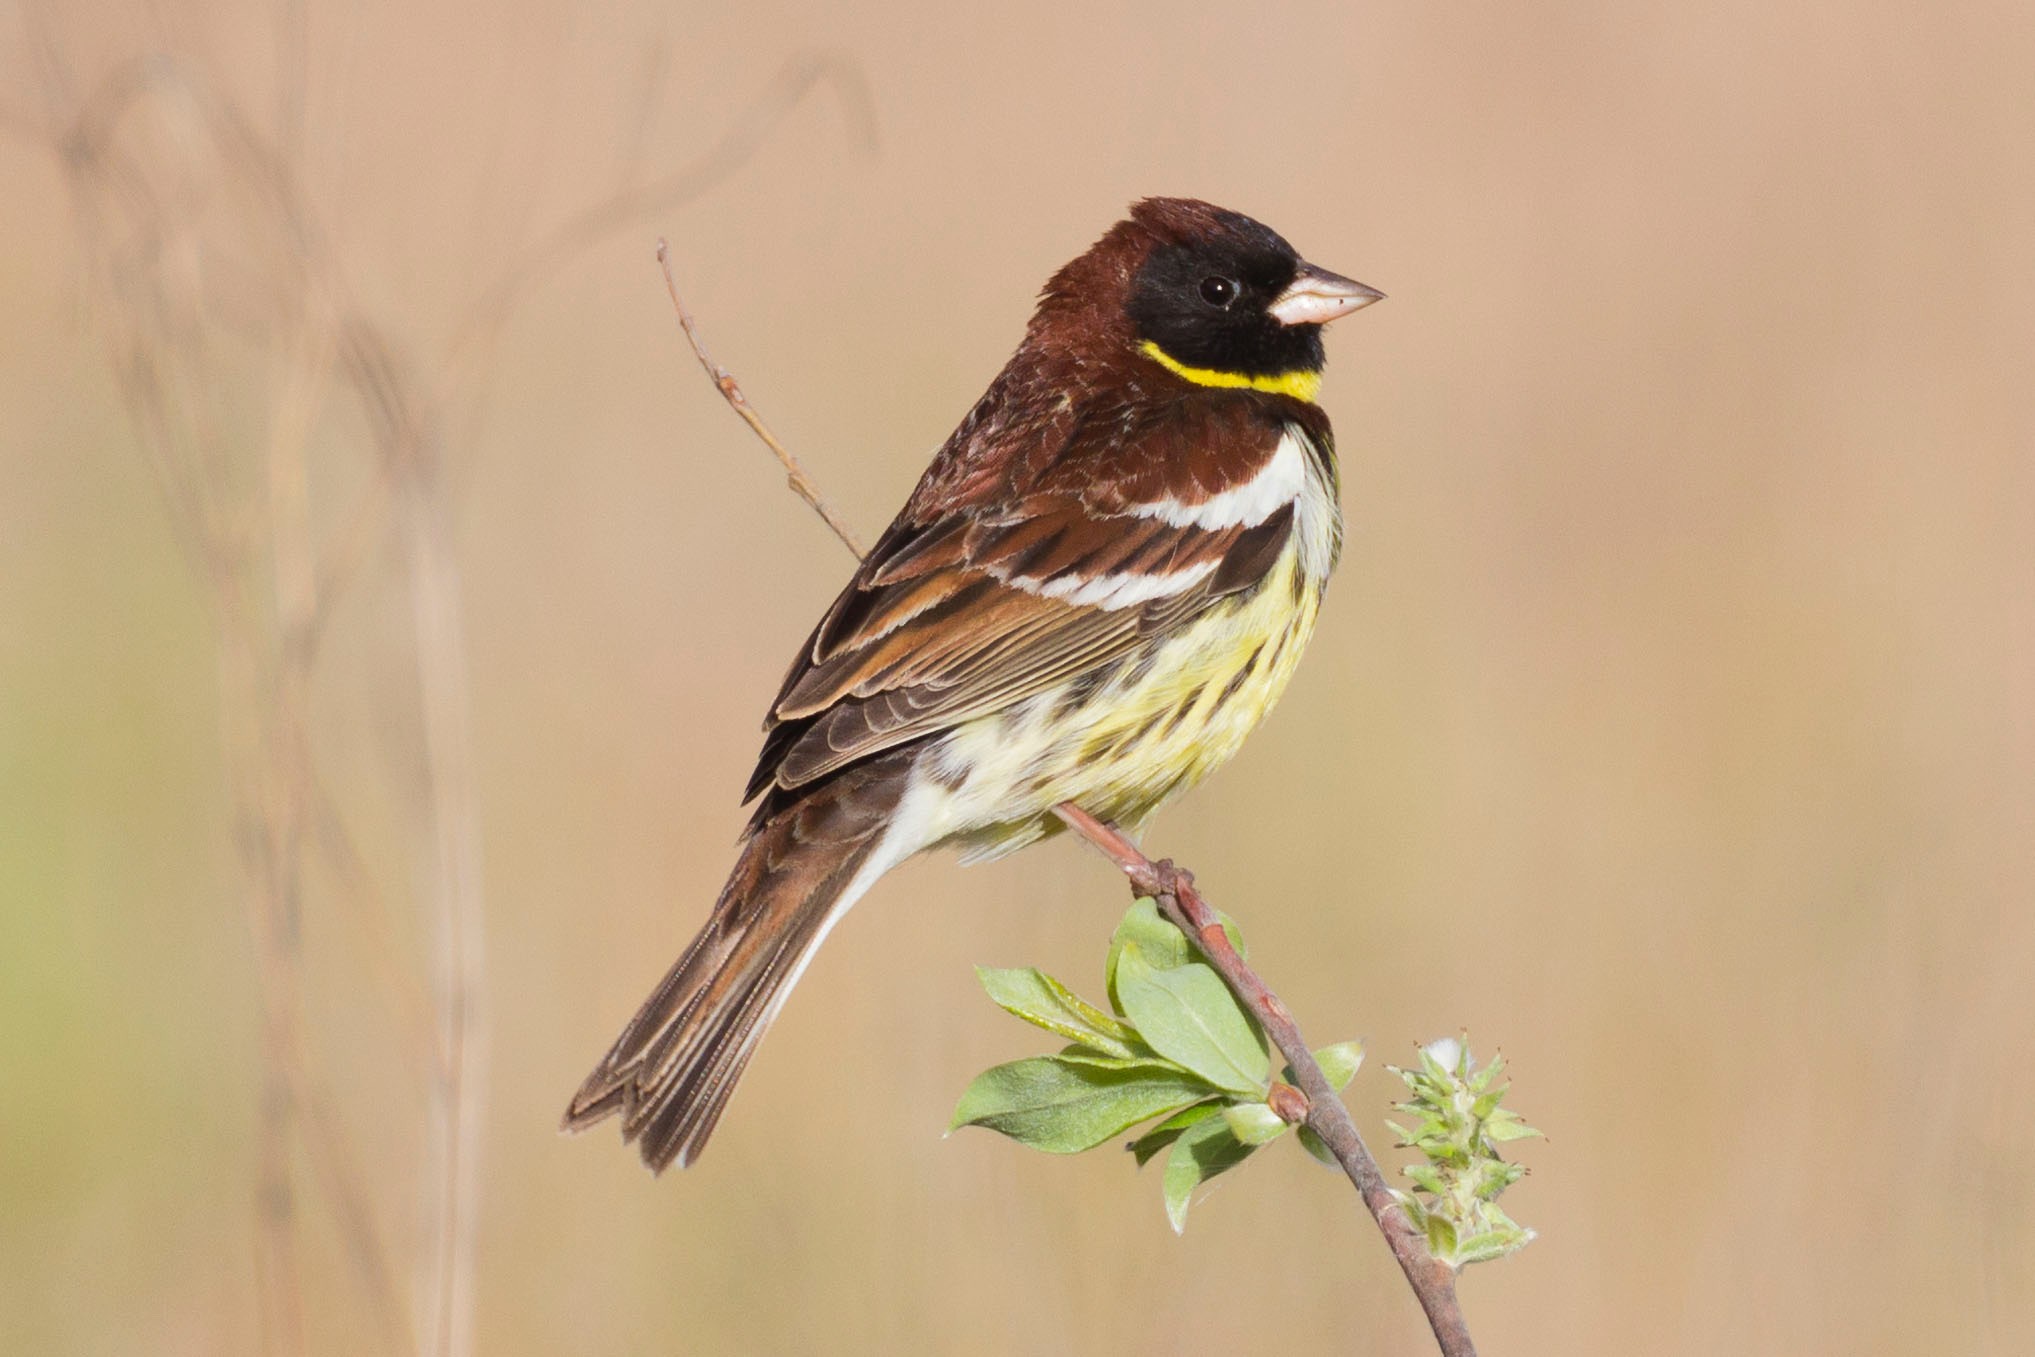 Known as the rice bird in southern China, where it is a luxury sought after by gourmets, the previously common yellow-breasted bunting was last year listed as critically endangered. Experts blame its rapid decline on illegal trade